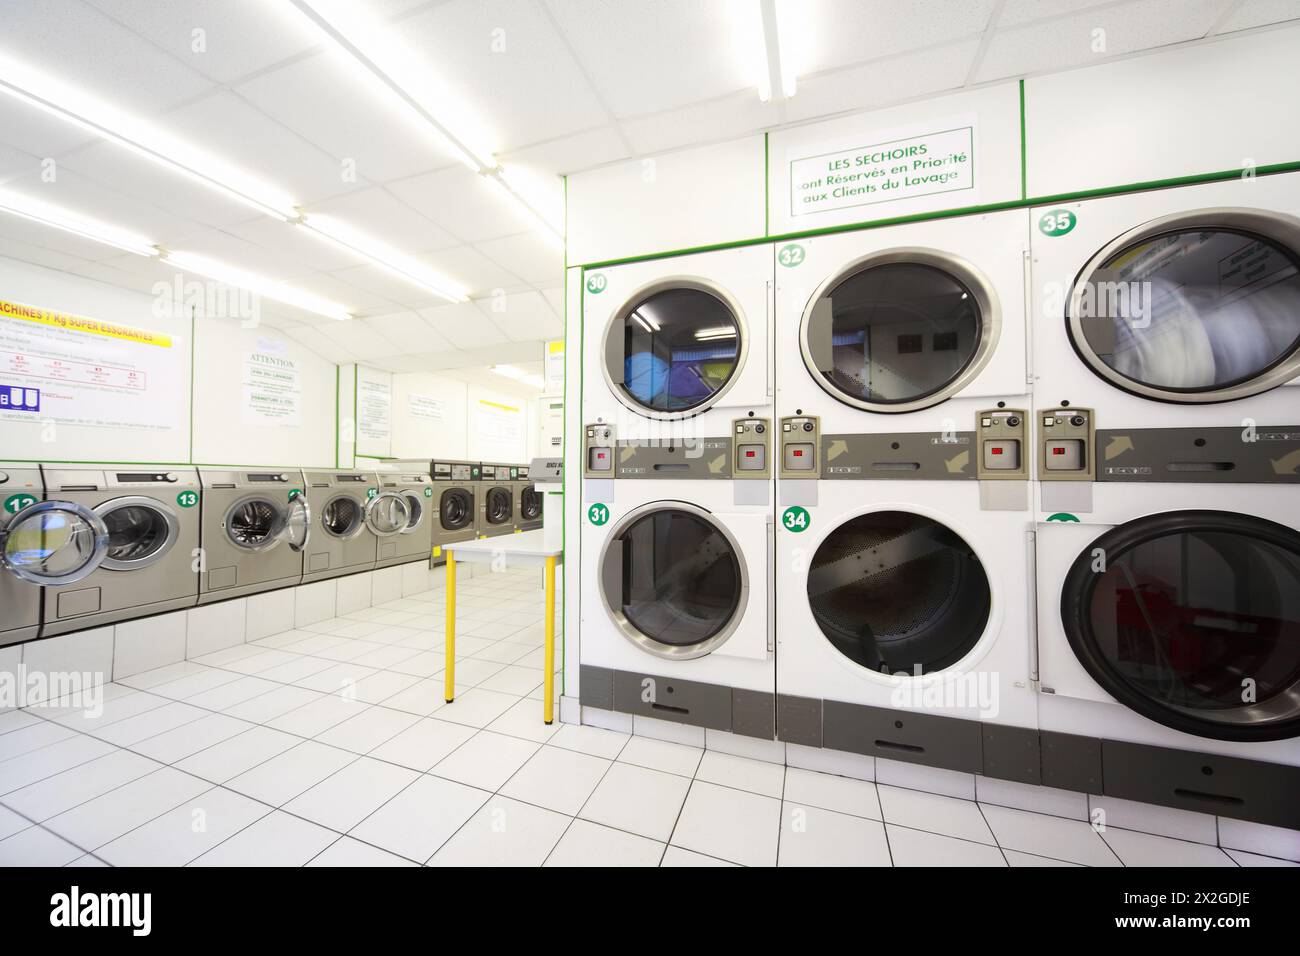 number of washing machines in empty public laundry, instructions on walls Stock Photo